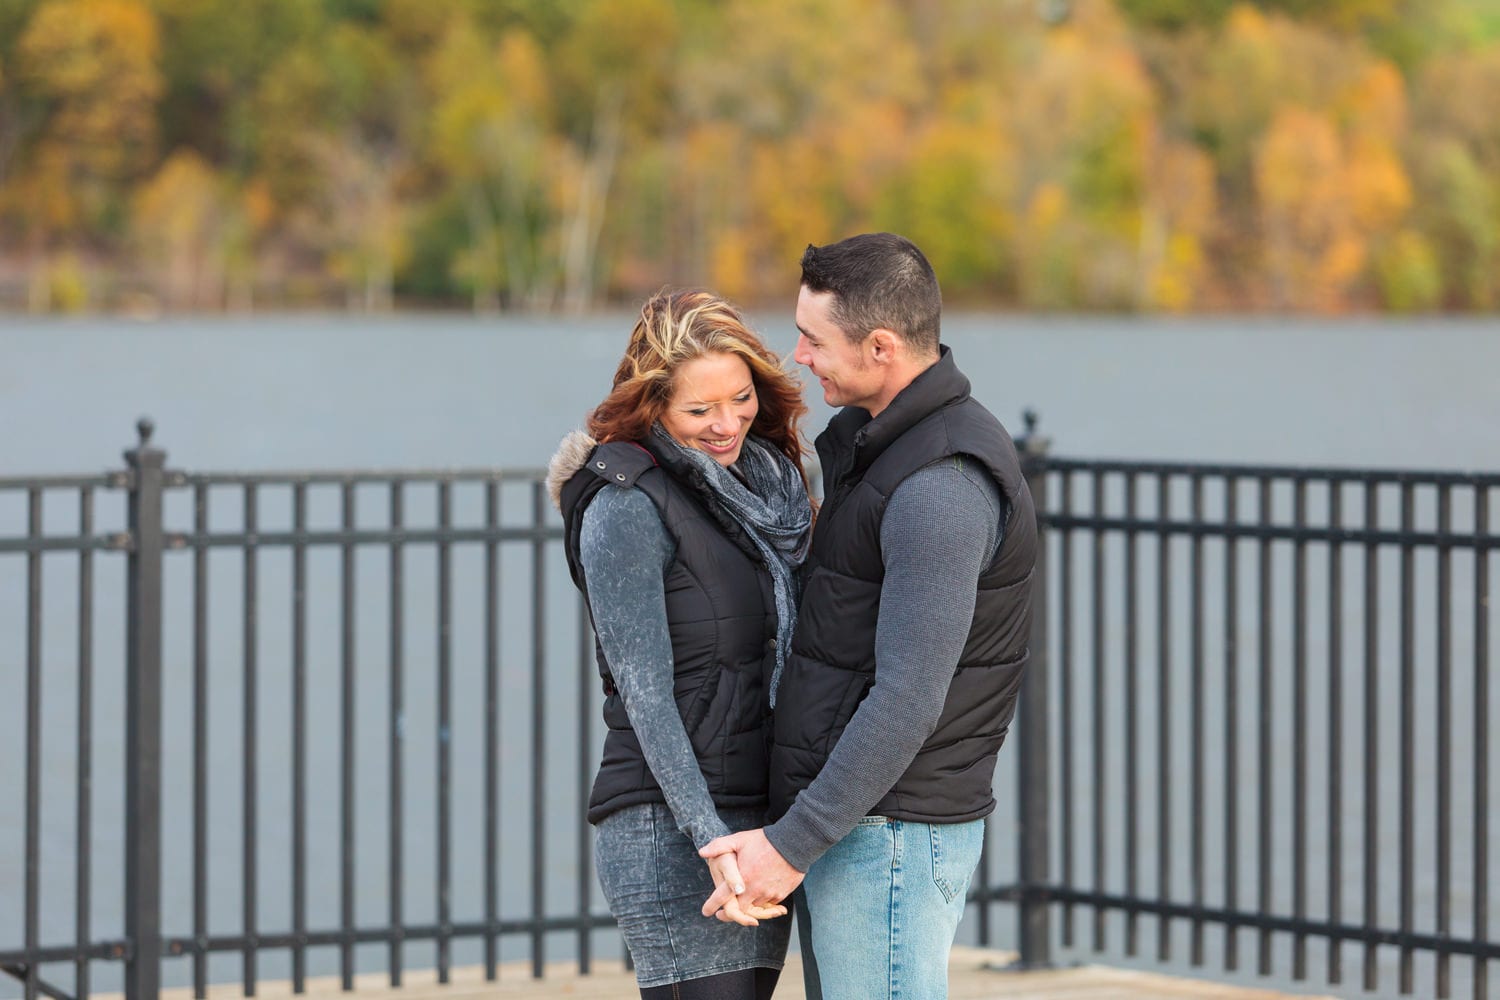 006-catskill_point_engagement_photography